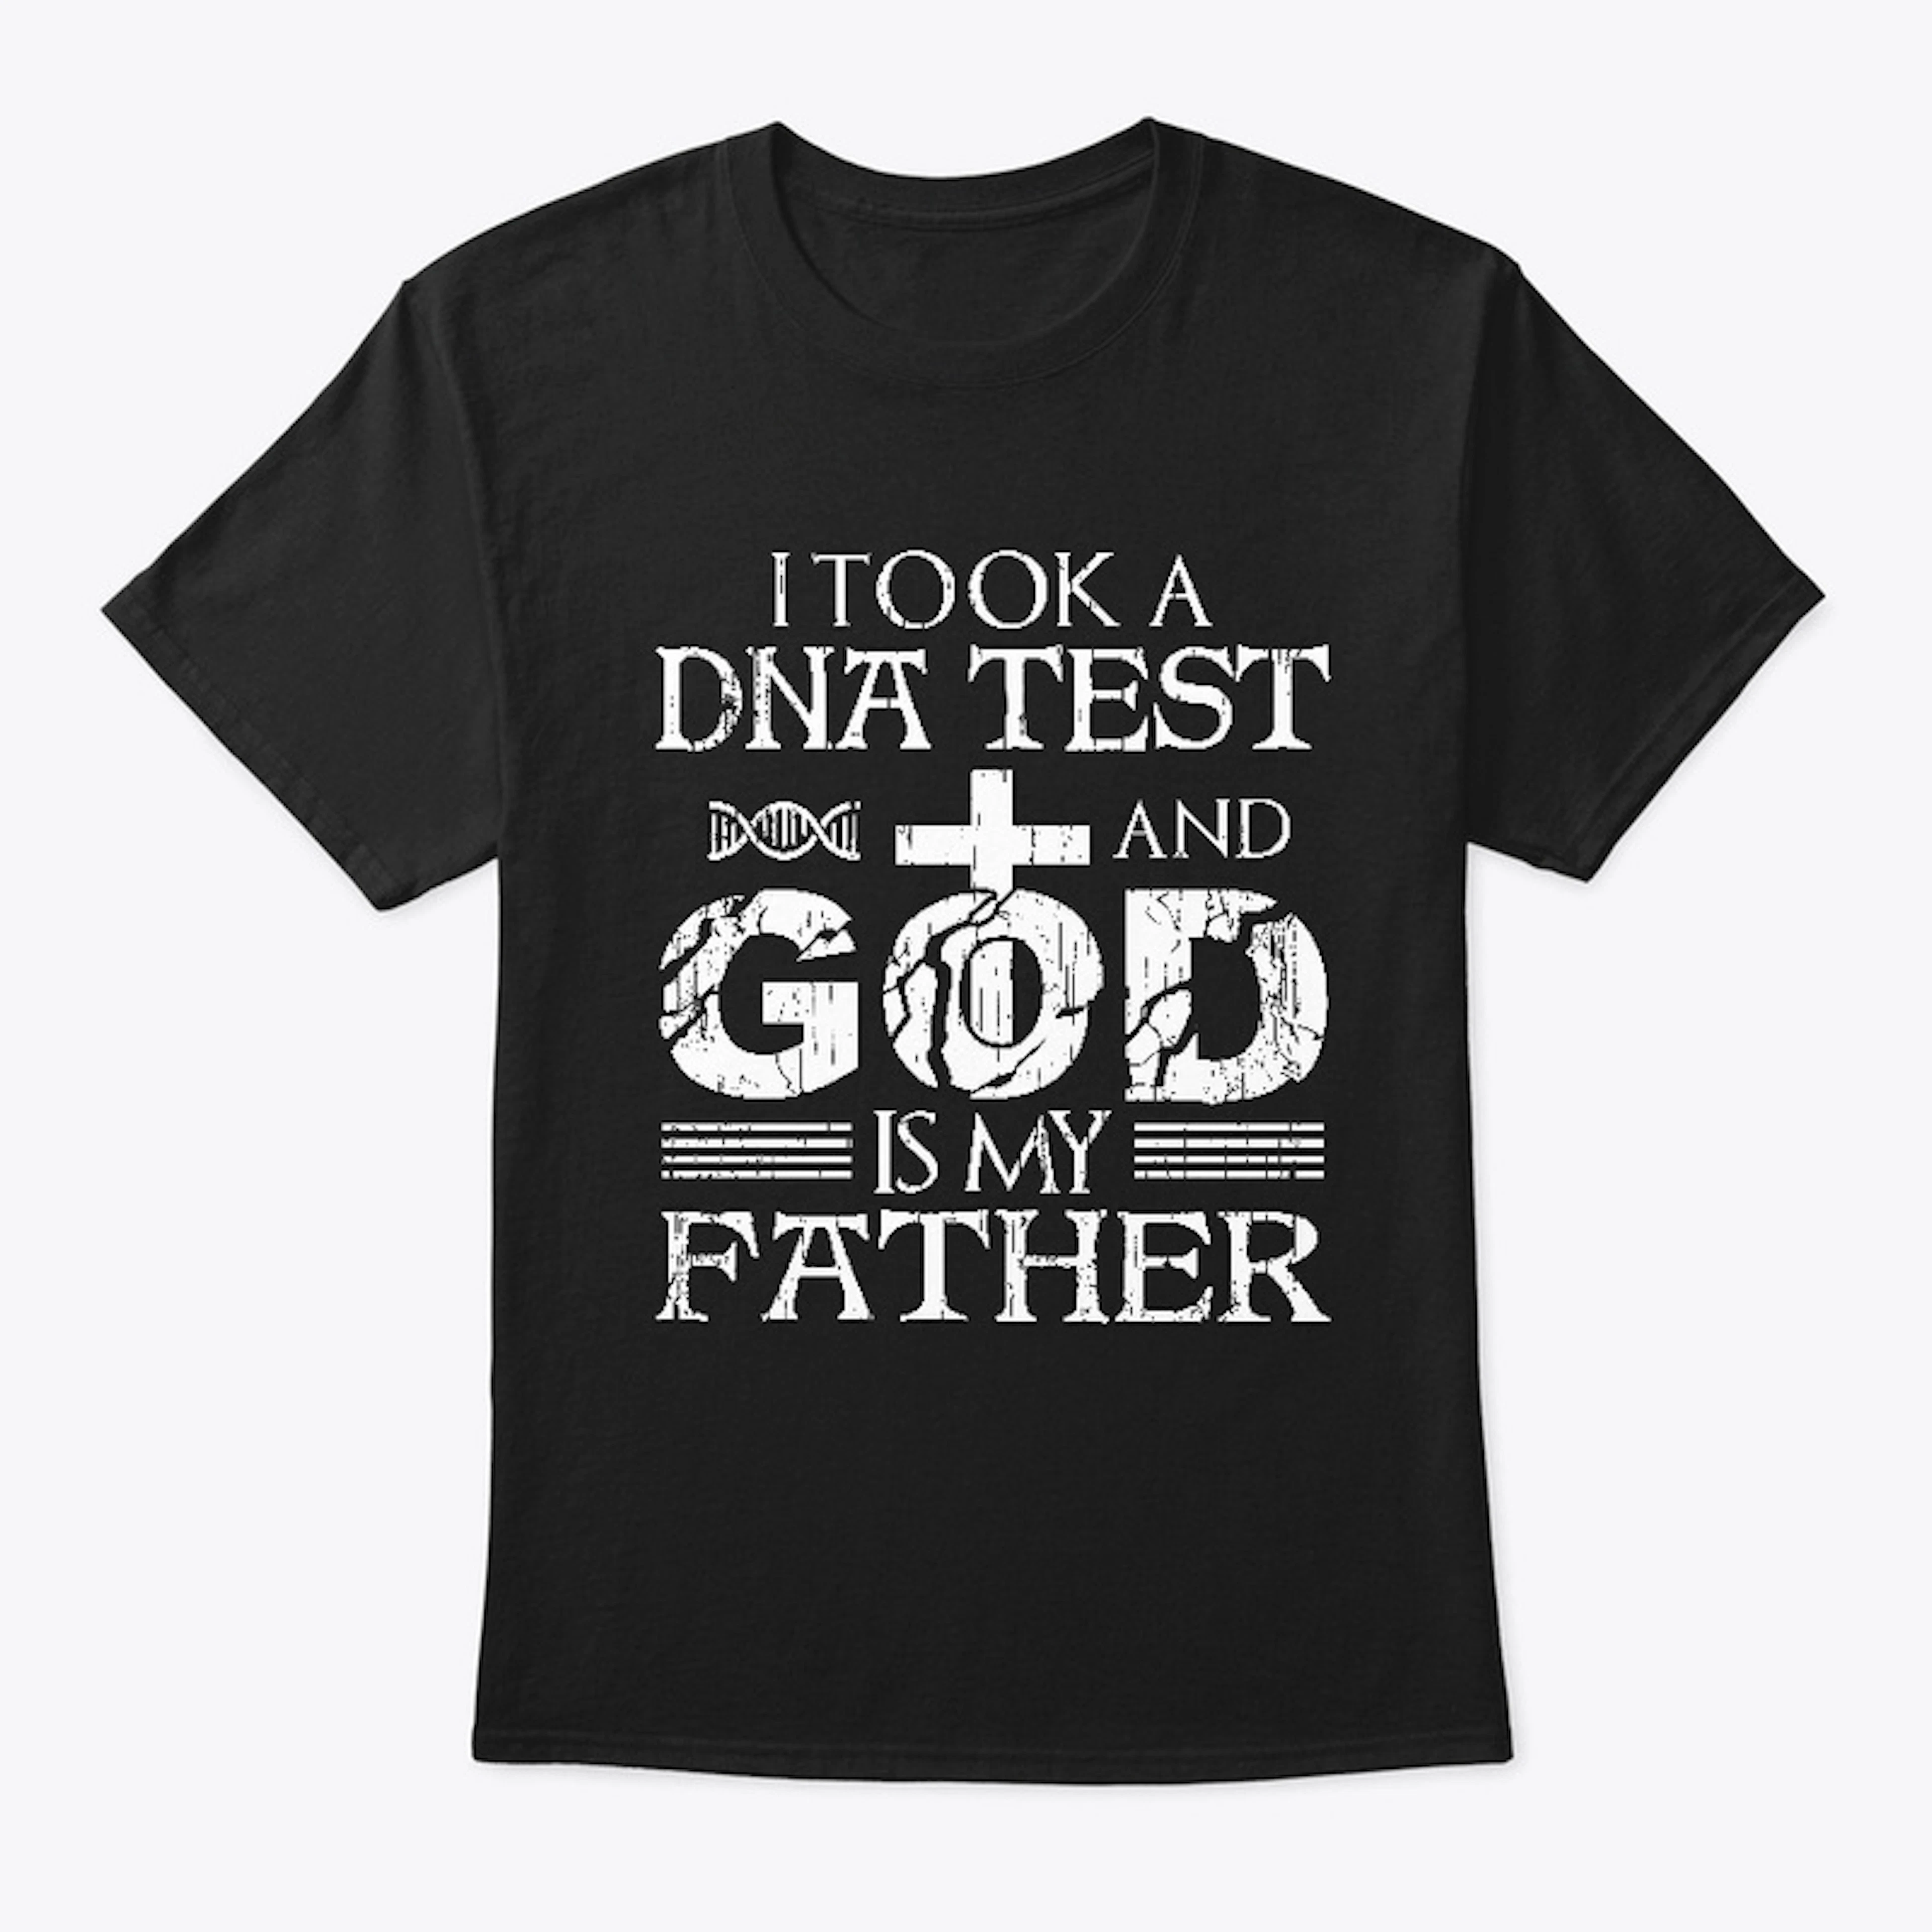 GOD IS MY FATHER!